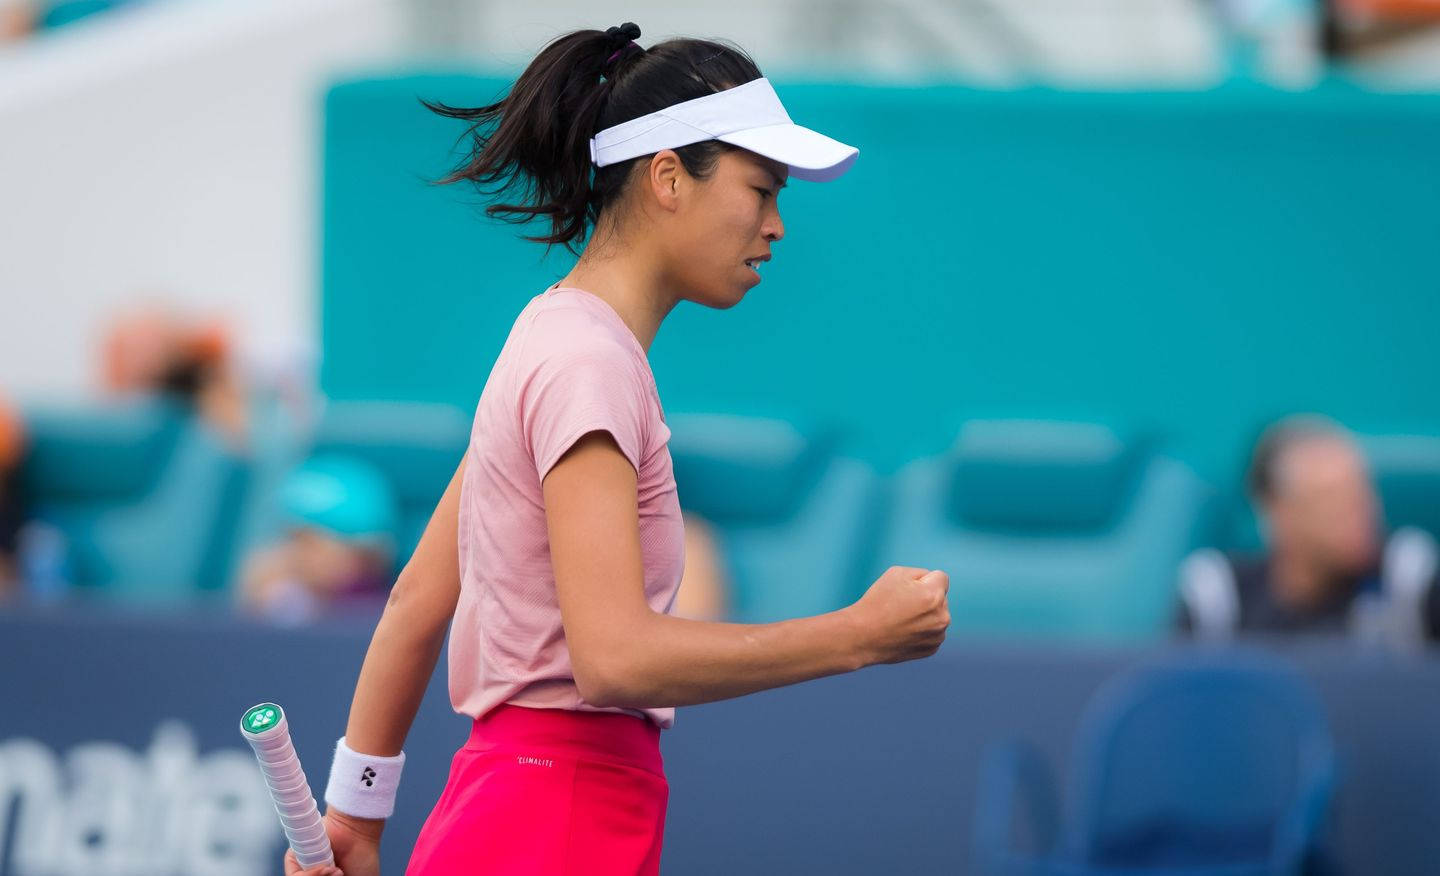 Su-wei Hsieh in Action: A Moment of Victory Wallpaper